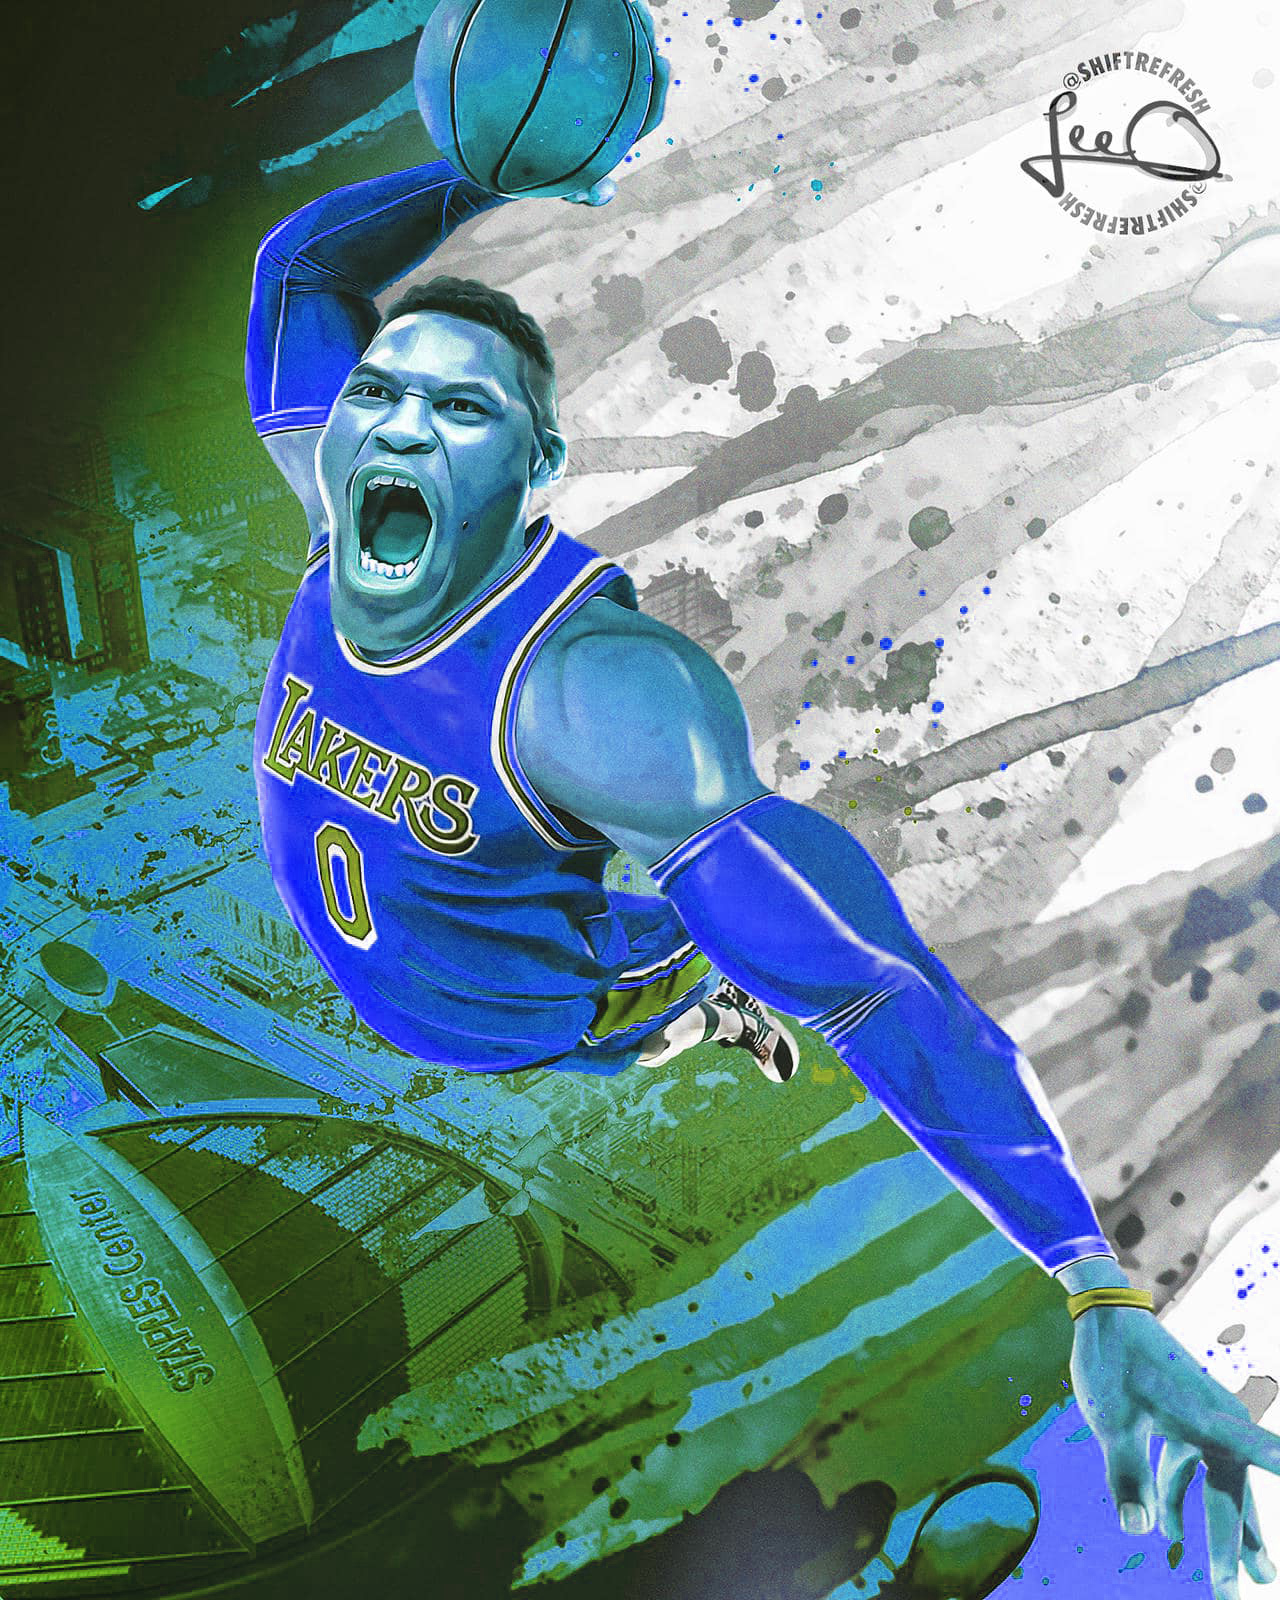 Dunk Drawing Wallpaper Russell Westbrook  Russell Westbrook Png PNG Image   Transparent PNG Free Download on SeekPNG